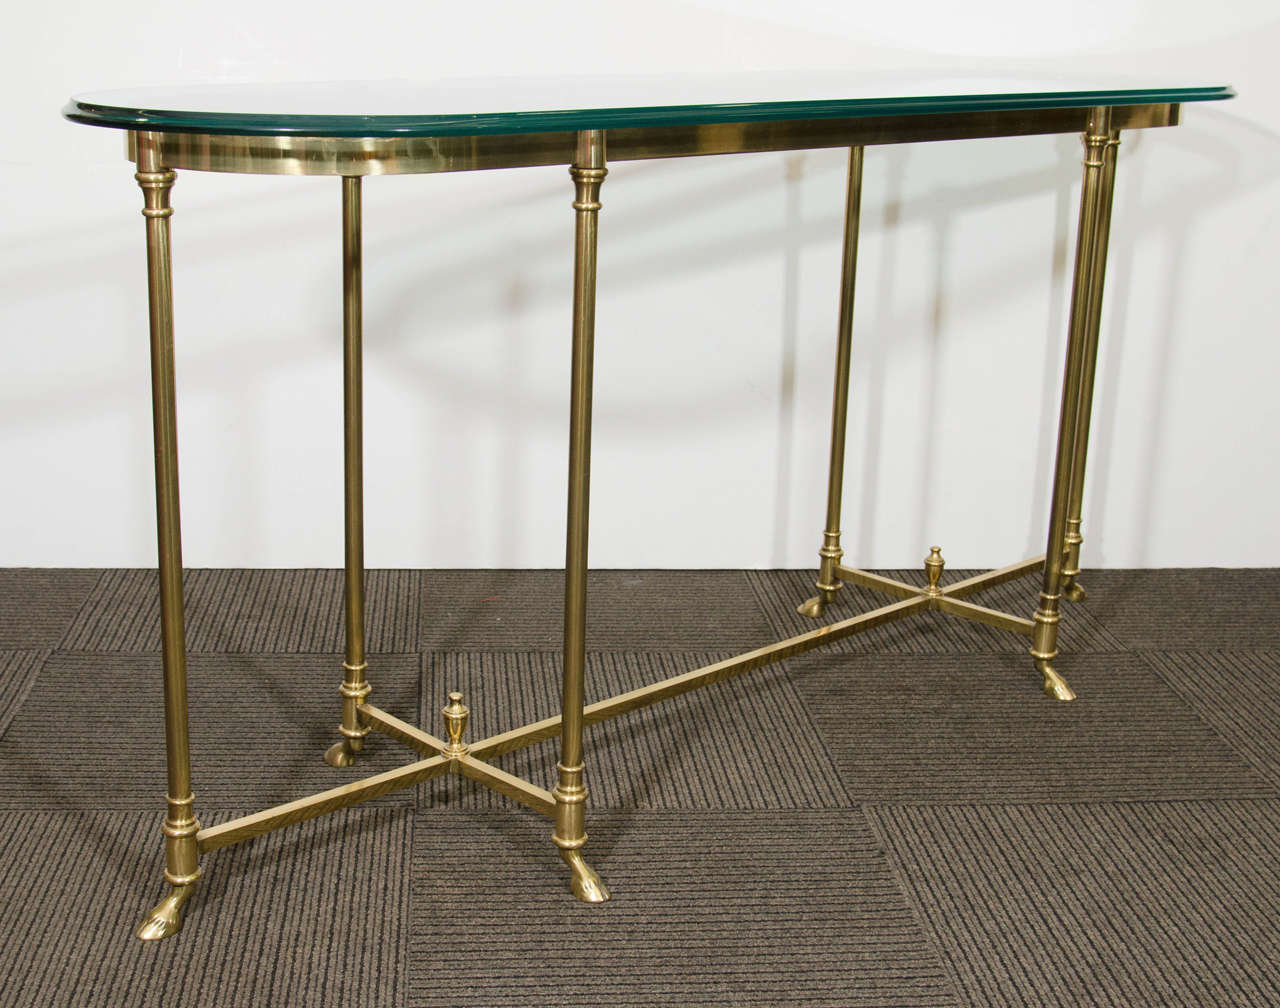 20th Century A Hollywood Regency Style Console Table with Hoof Feet By La Barge